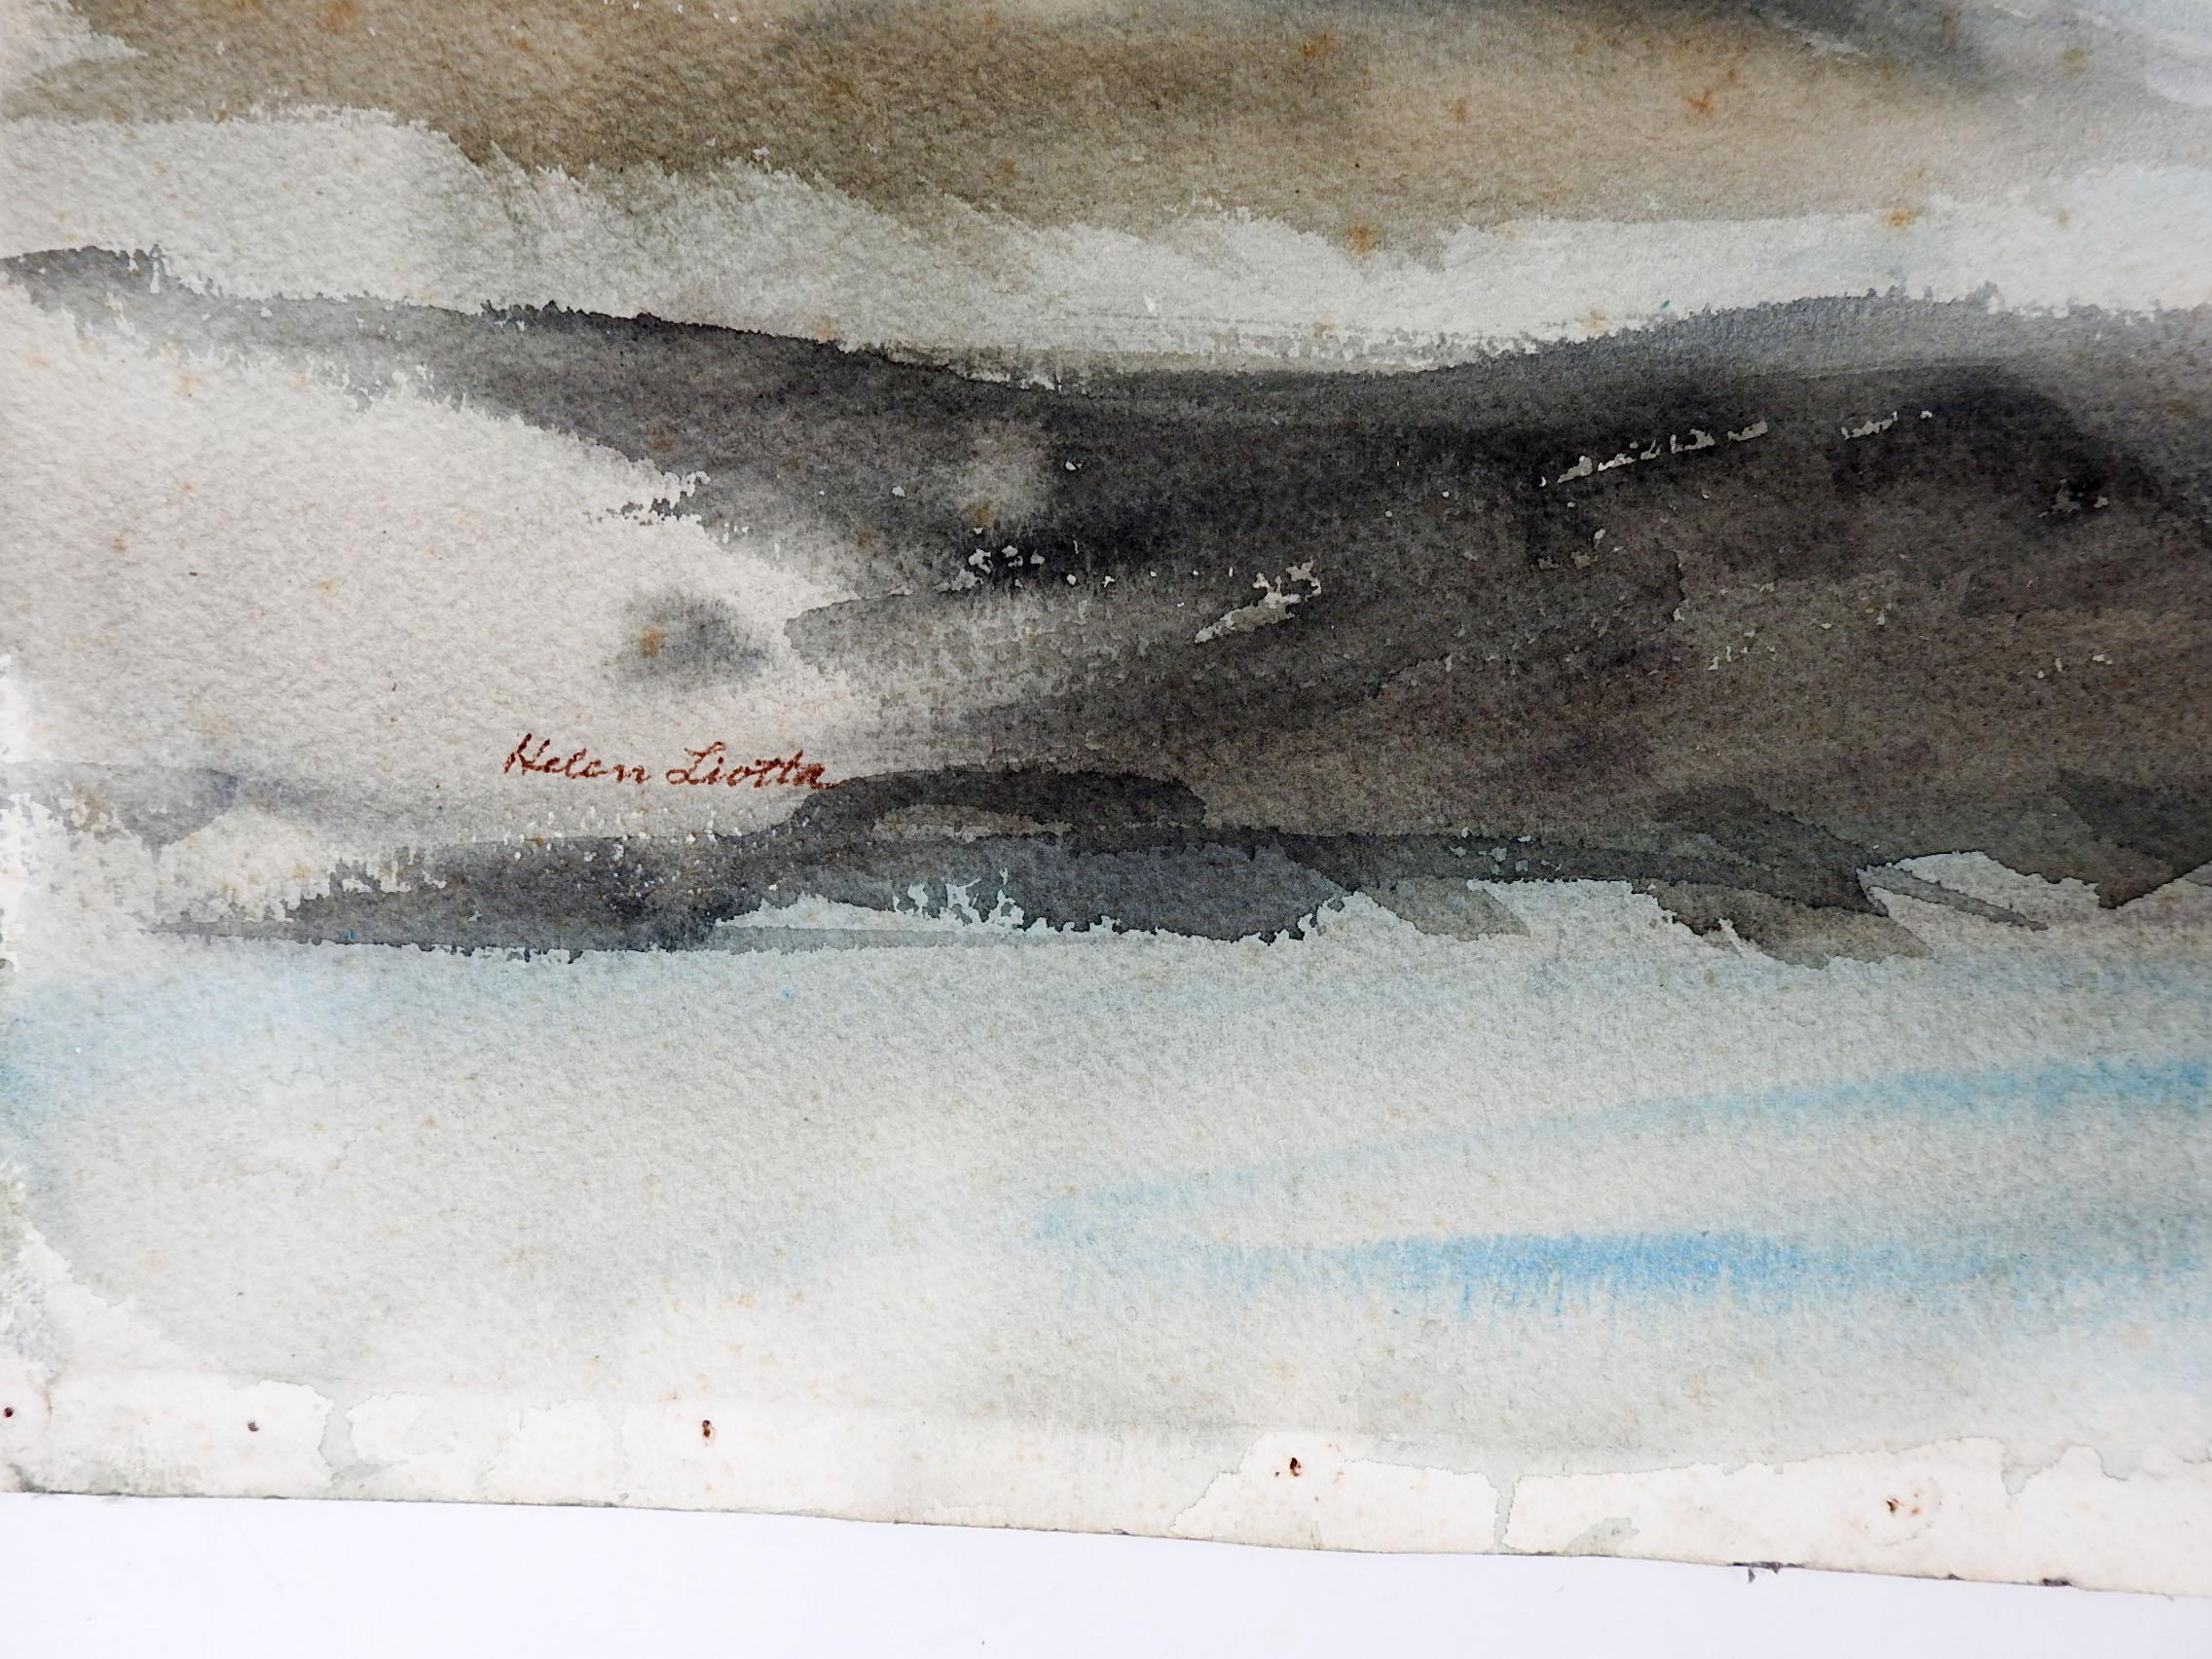 Vintage mid-20th century watercolor on paper California seascape painting. Signed Helen Liotta (20th Century) California, in turquoise, blue and grey. Unframed, overall foxing, edge wear.